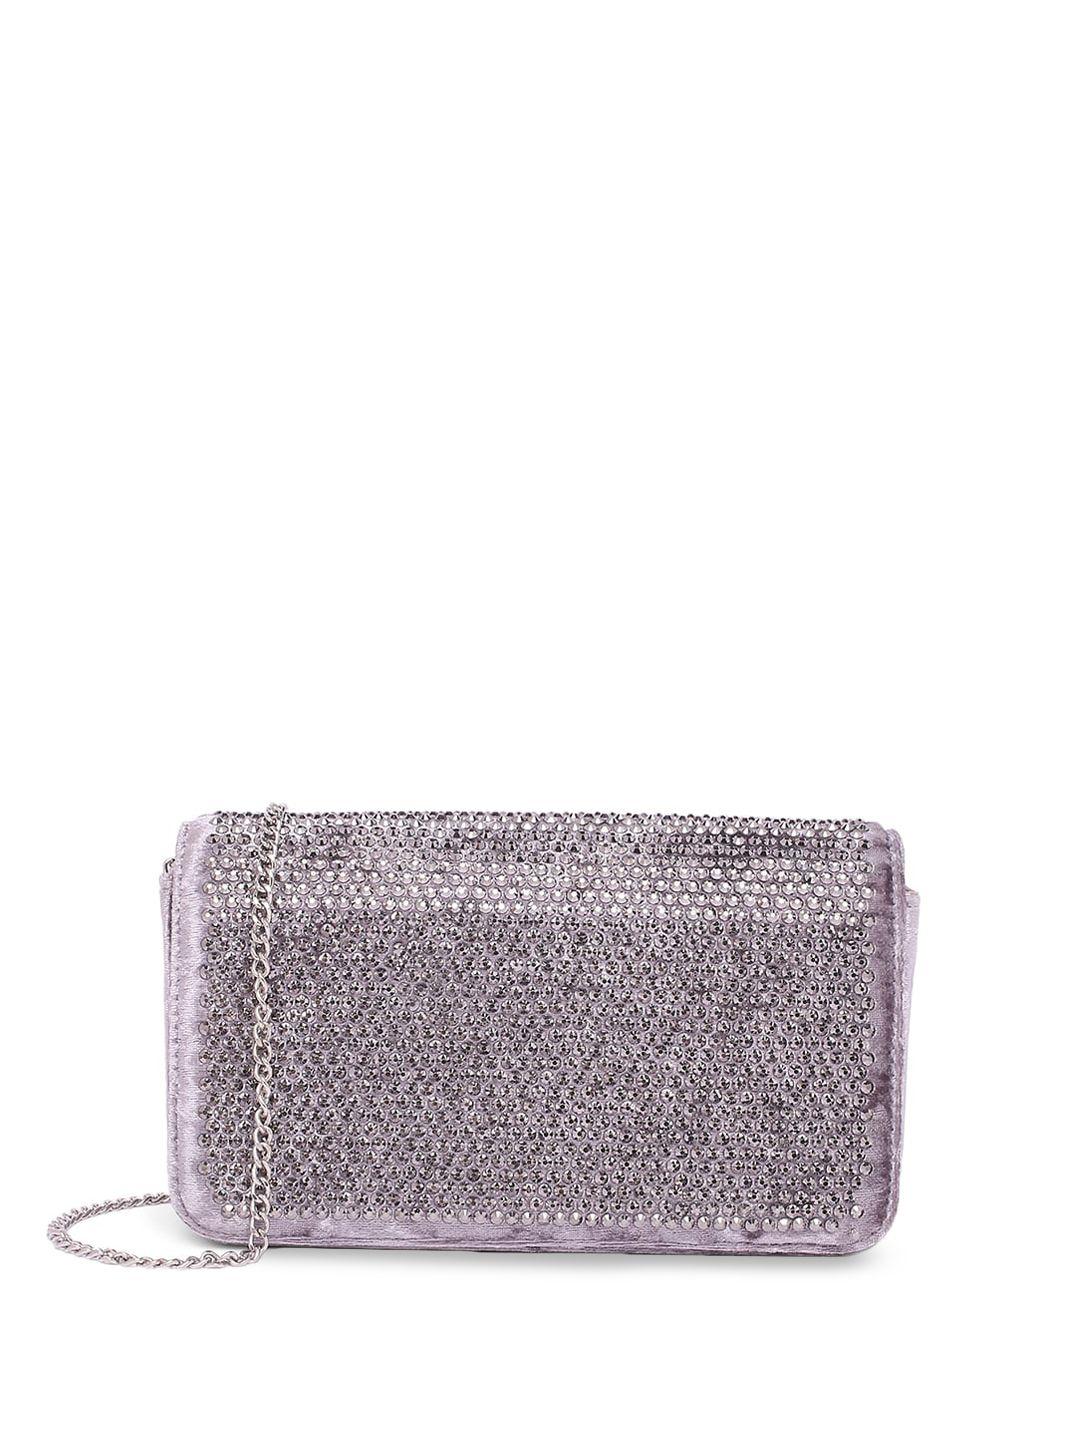 inc 5 synthetic leather embellished envelope clutch